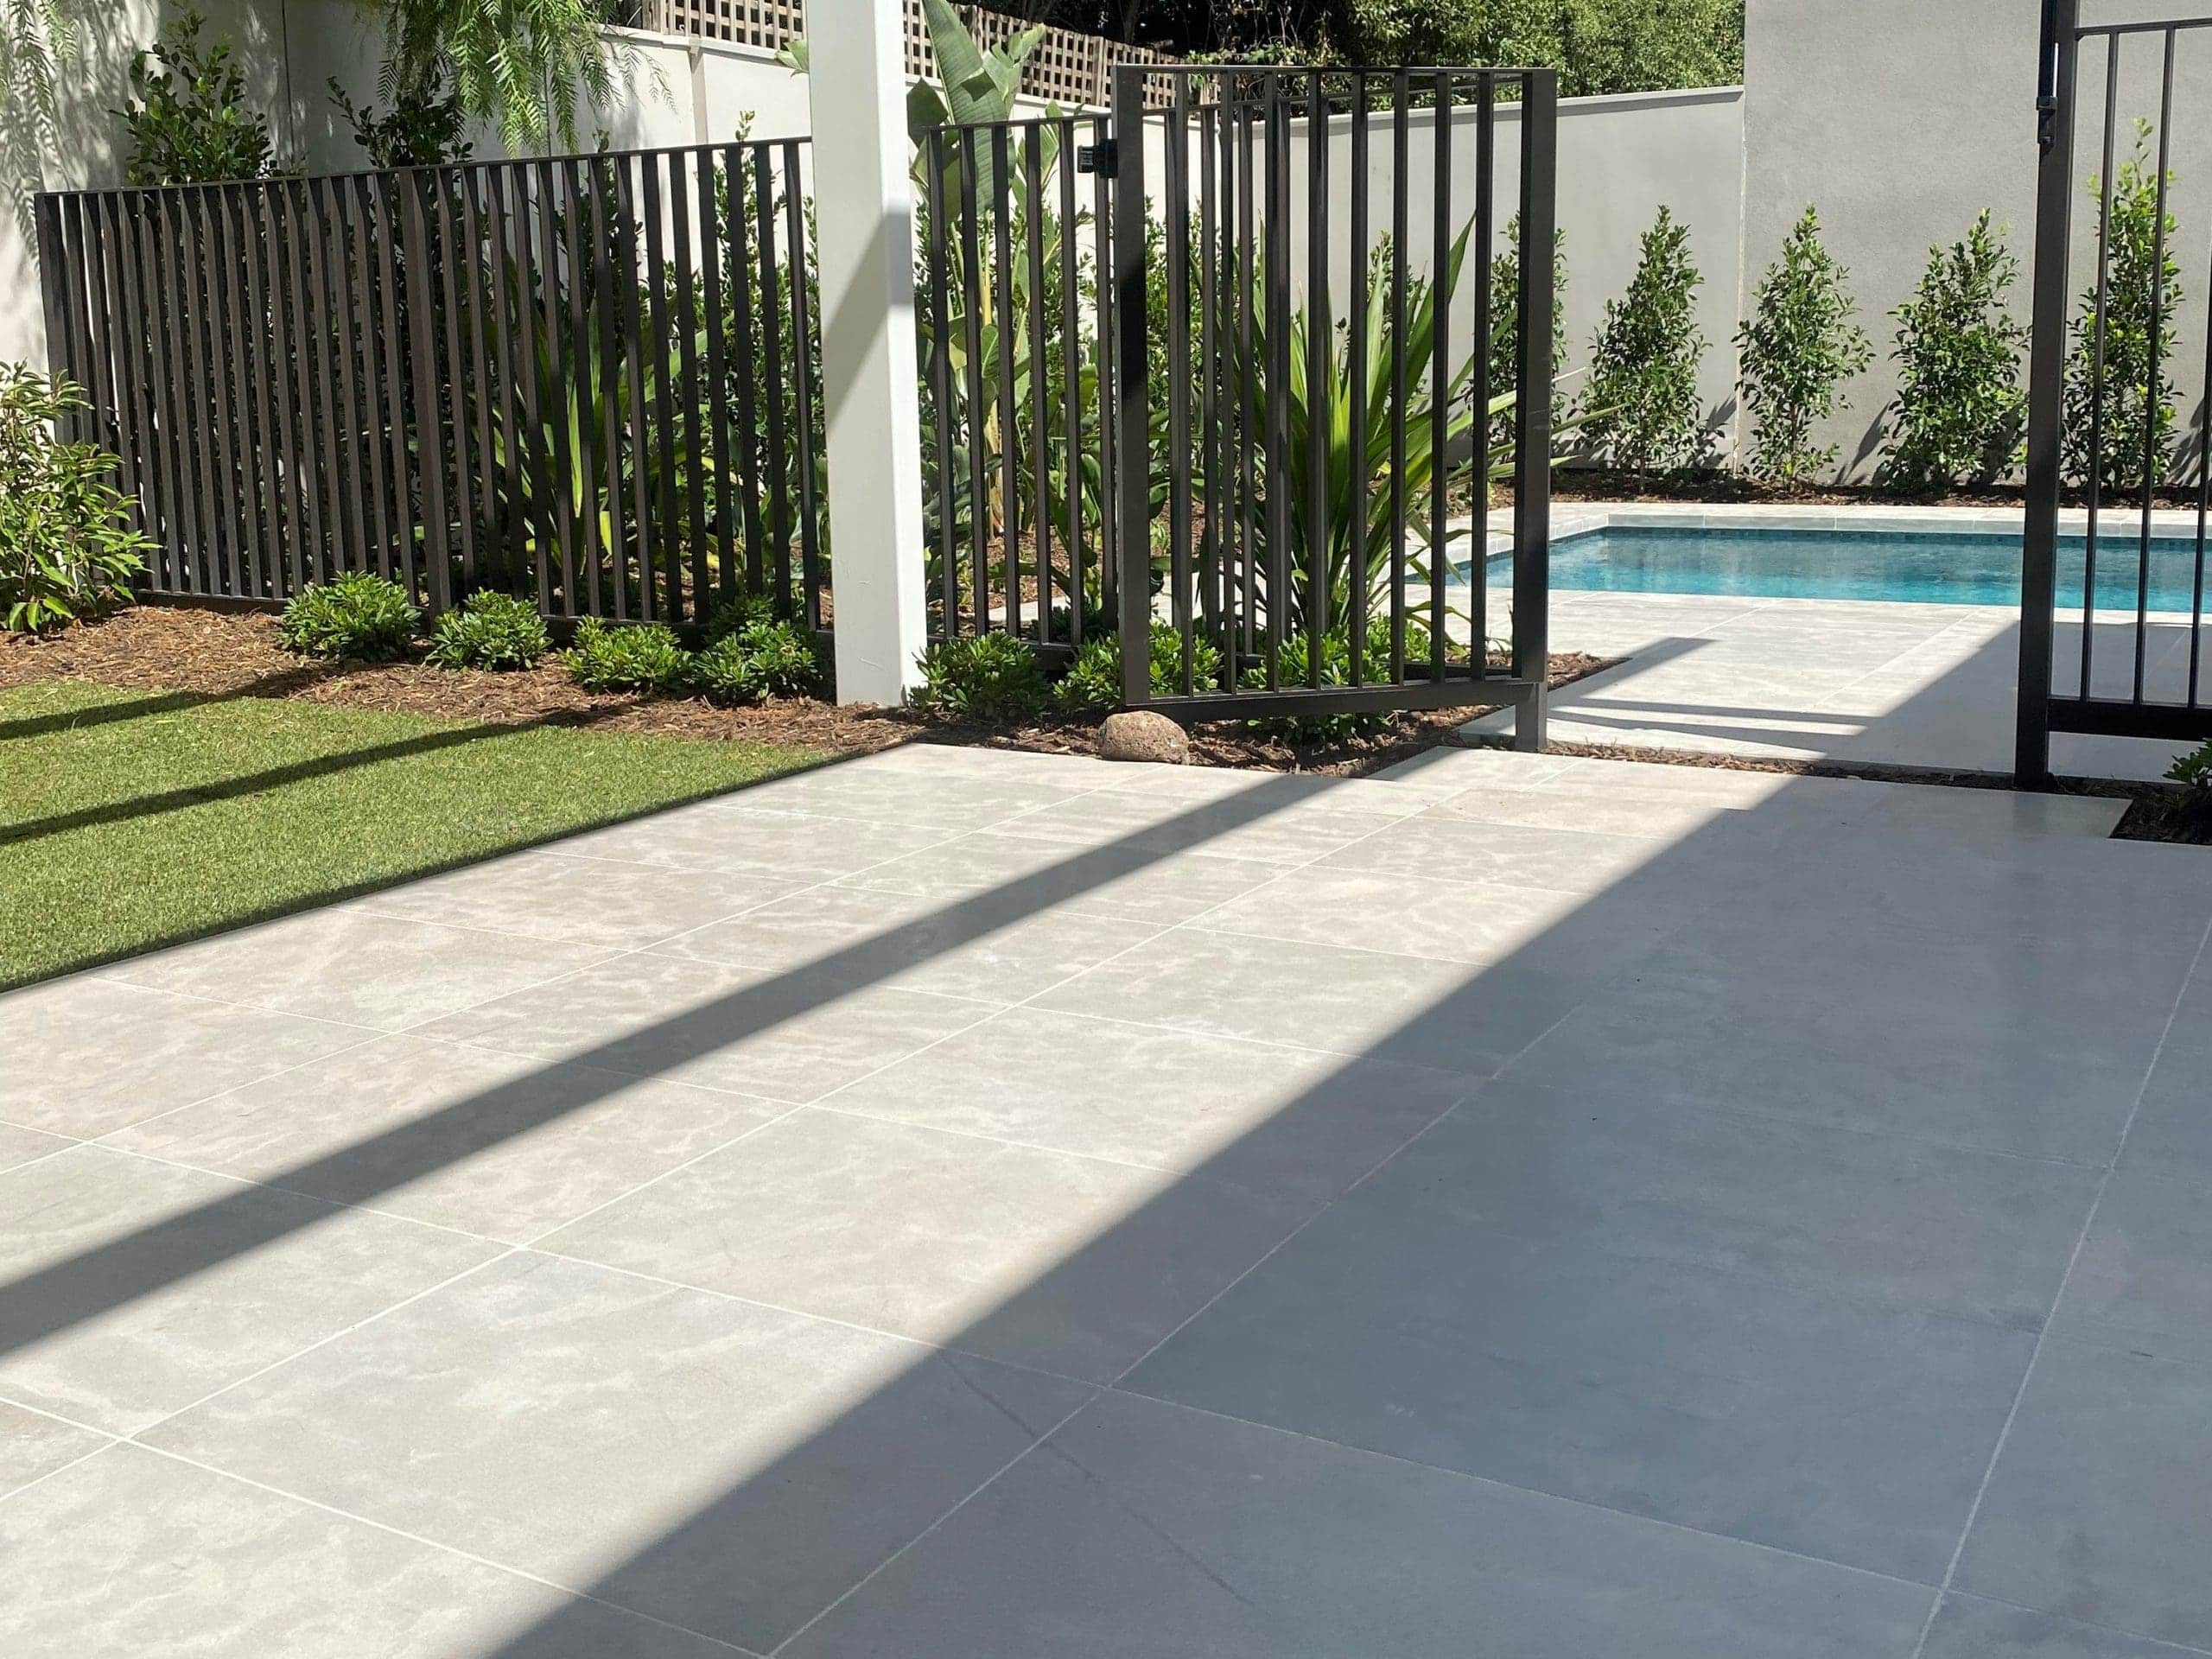 MADDISON BRUSHED & TUMBLED LIMESTONE_RMS TRADERS_NATURAL STONE GREY PAVERS POOL COPING TILES SUPPLIER MELBOURNE (92)